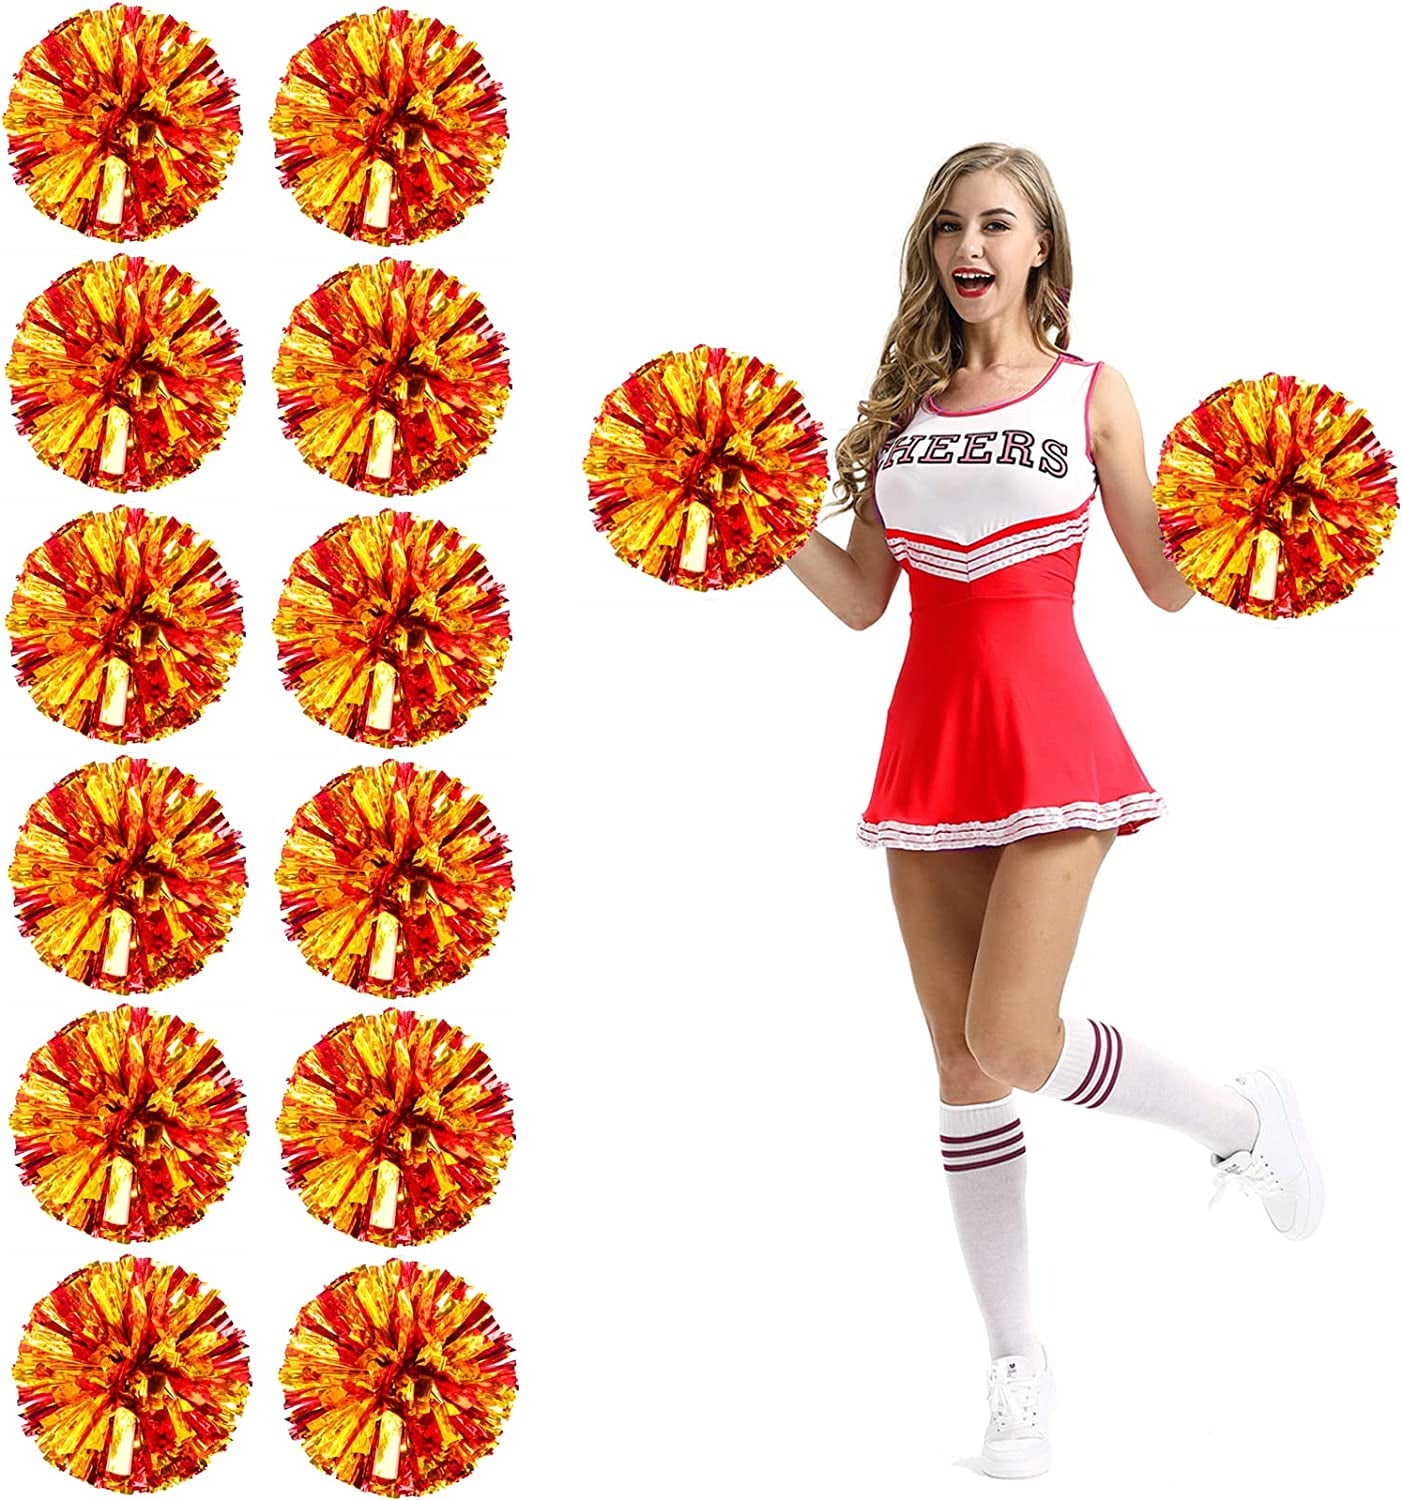 Red Pom Poms Cheerleader Dance Kids & Adults Costume Accessory at